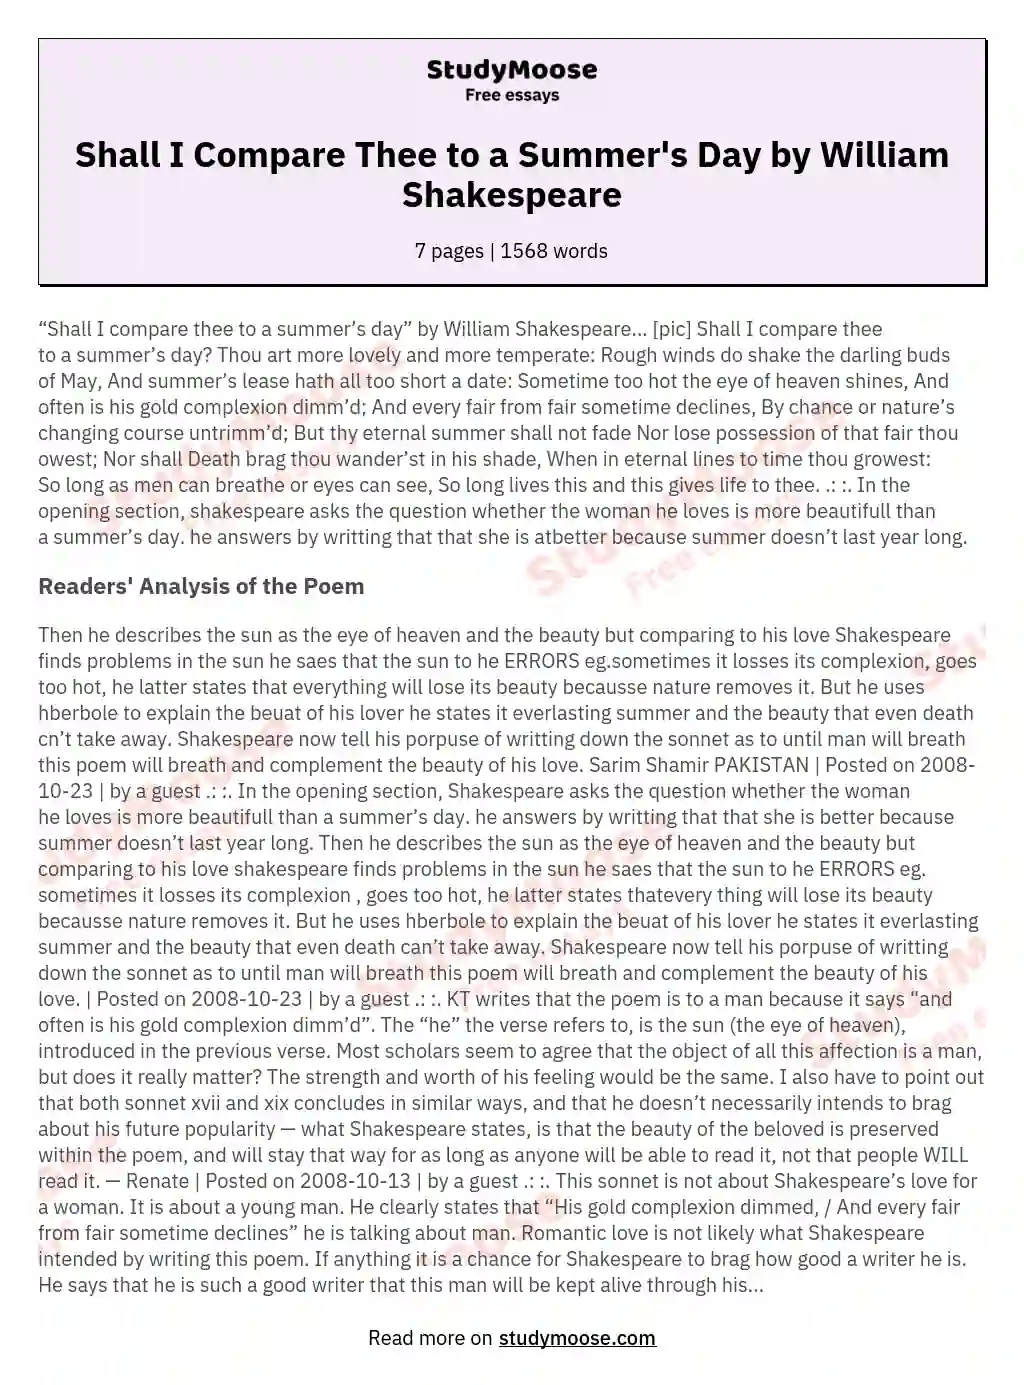 Shall I Compare Thee to a Summer's Day by William Shakespeare essay